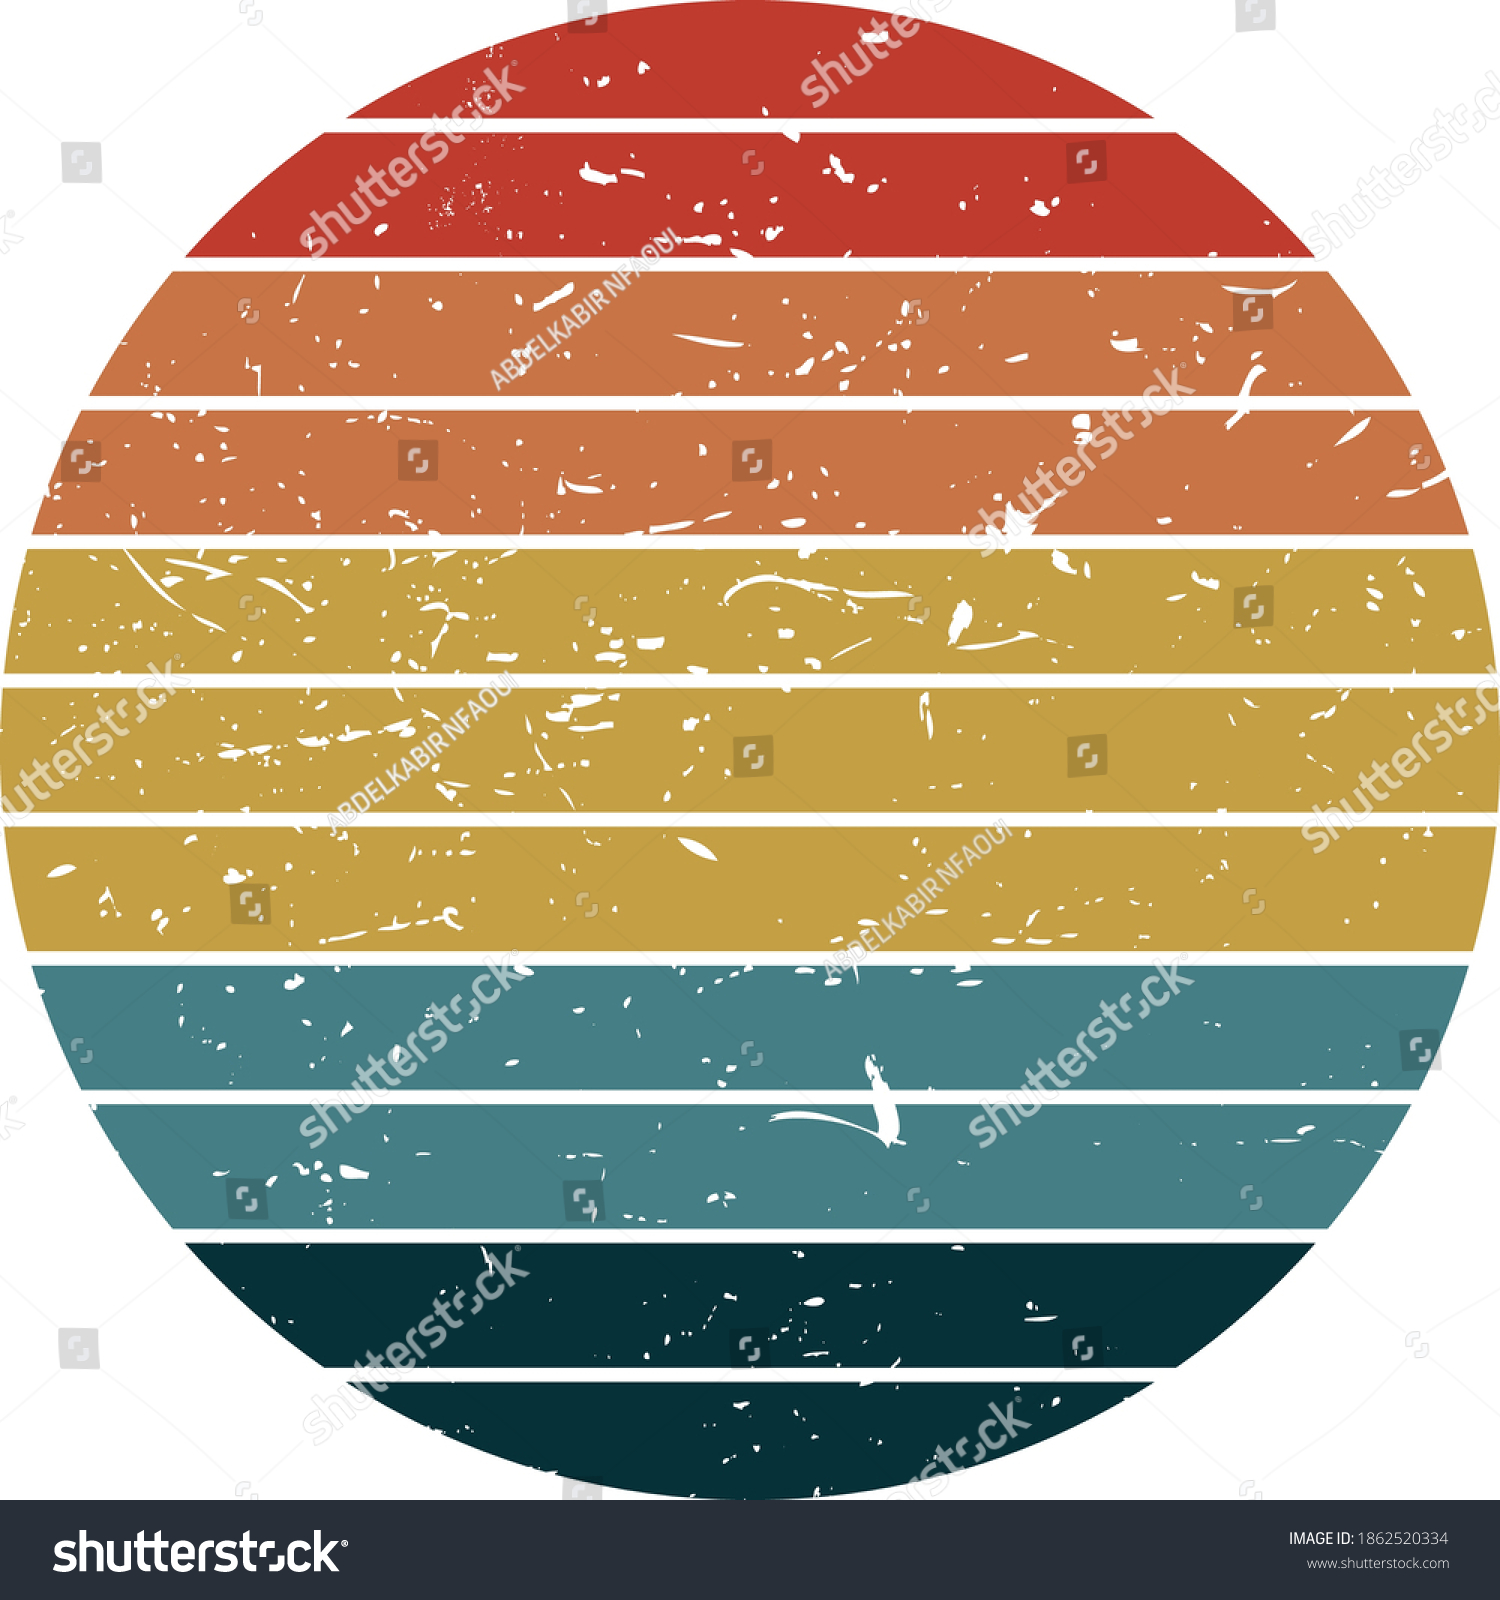 SVG of vintage retro striped sunset graphics.
you can edit and use in your projects (t-shirt,POD,book cover…). svg